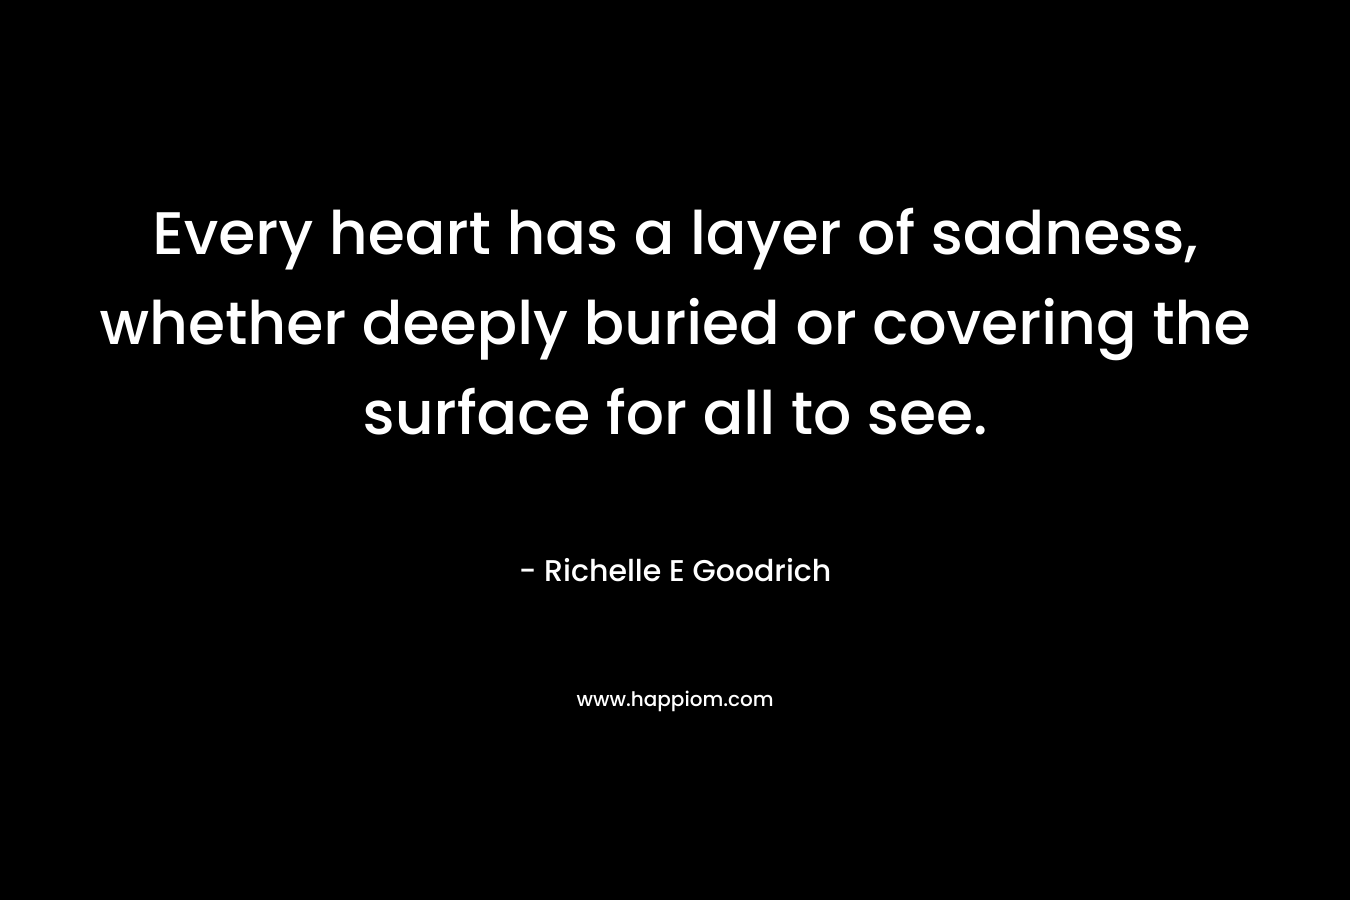 Every heart has a layer of sadness, whether deeply buried or covering the surface for all to see. – Richelle E Goodrich